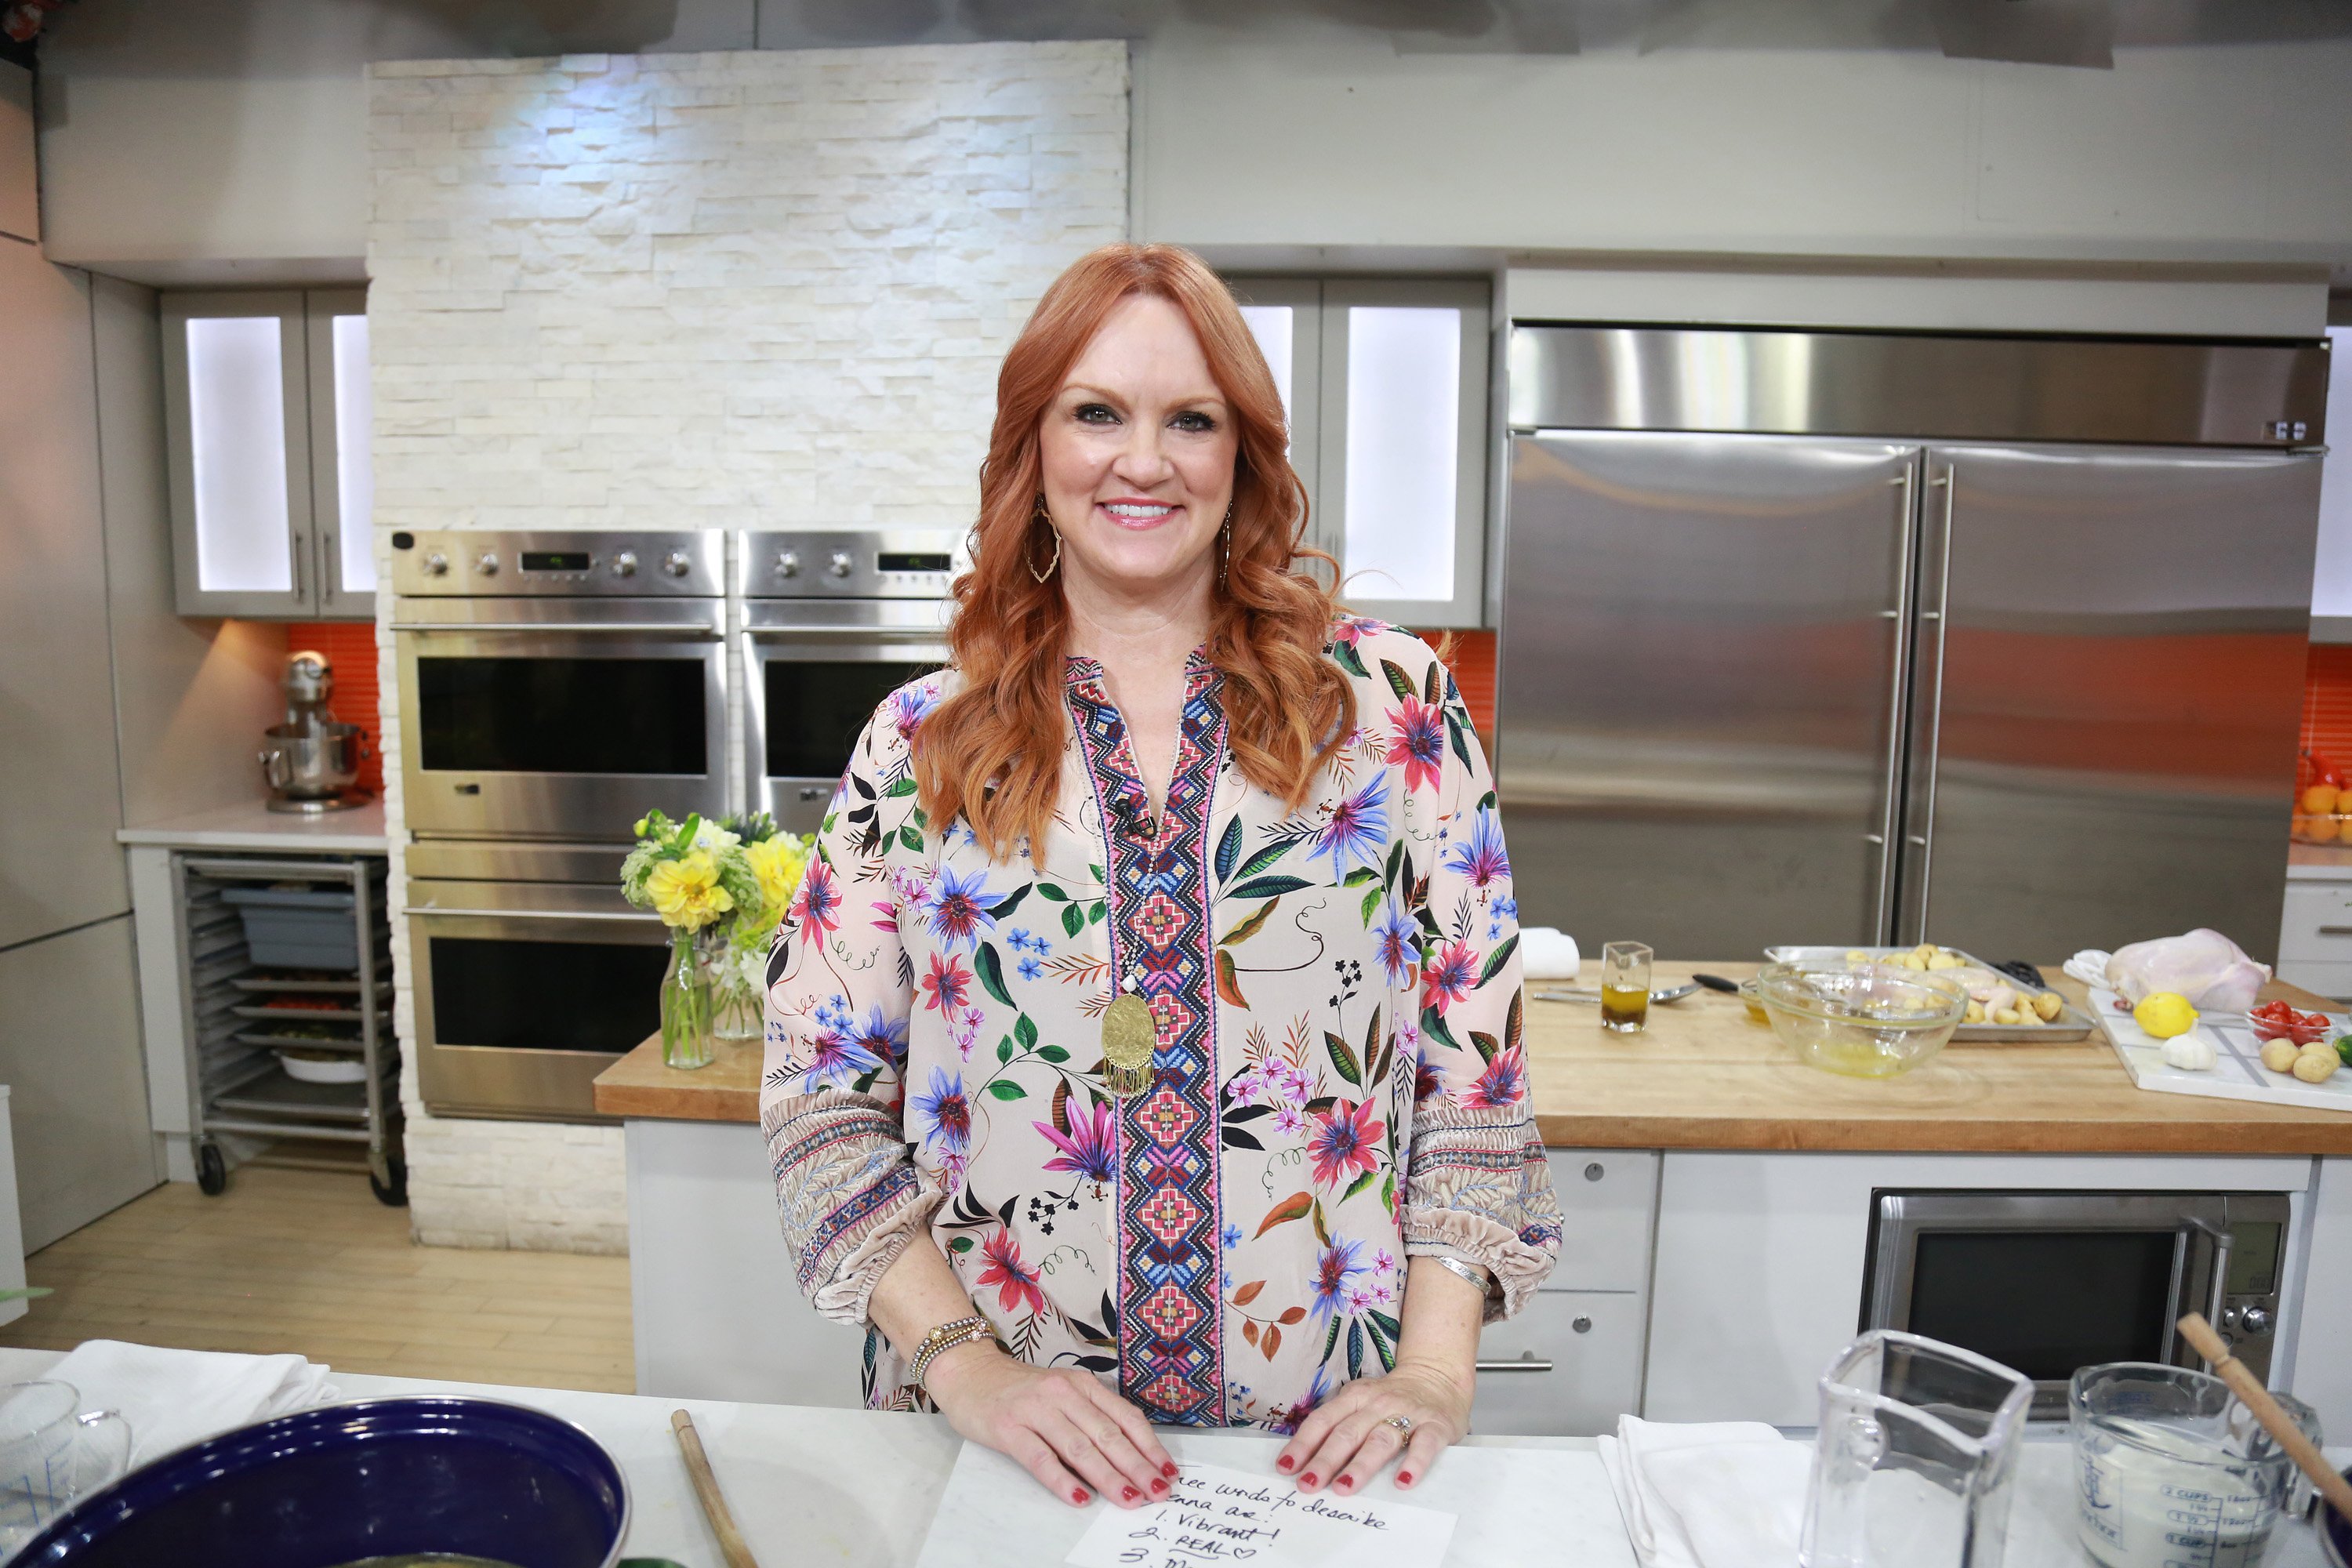 Ree Drummond wears a floral shirt while standing in the Today show kitchen.